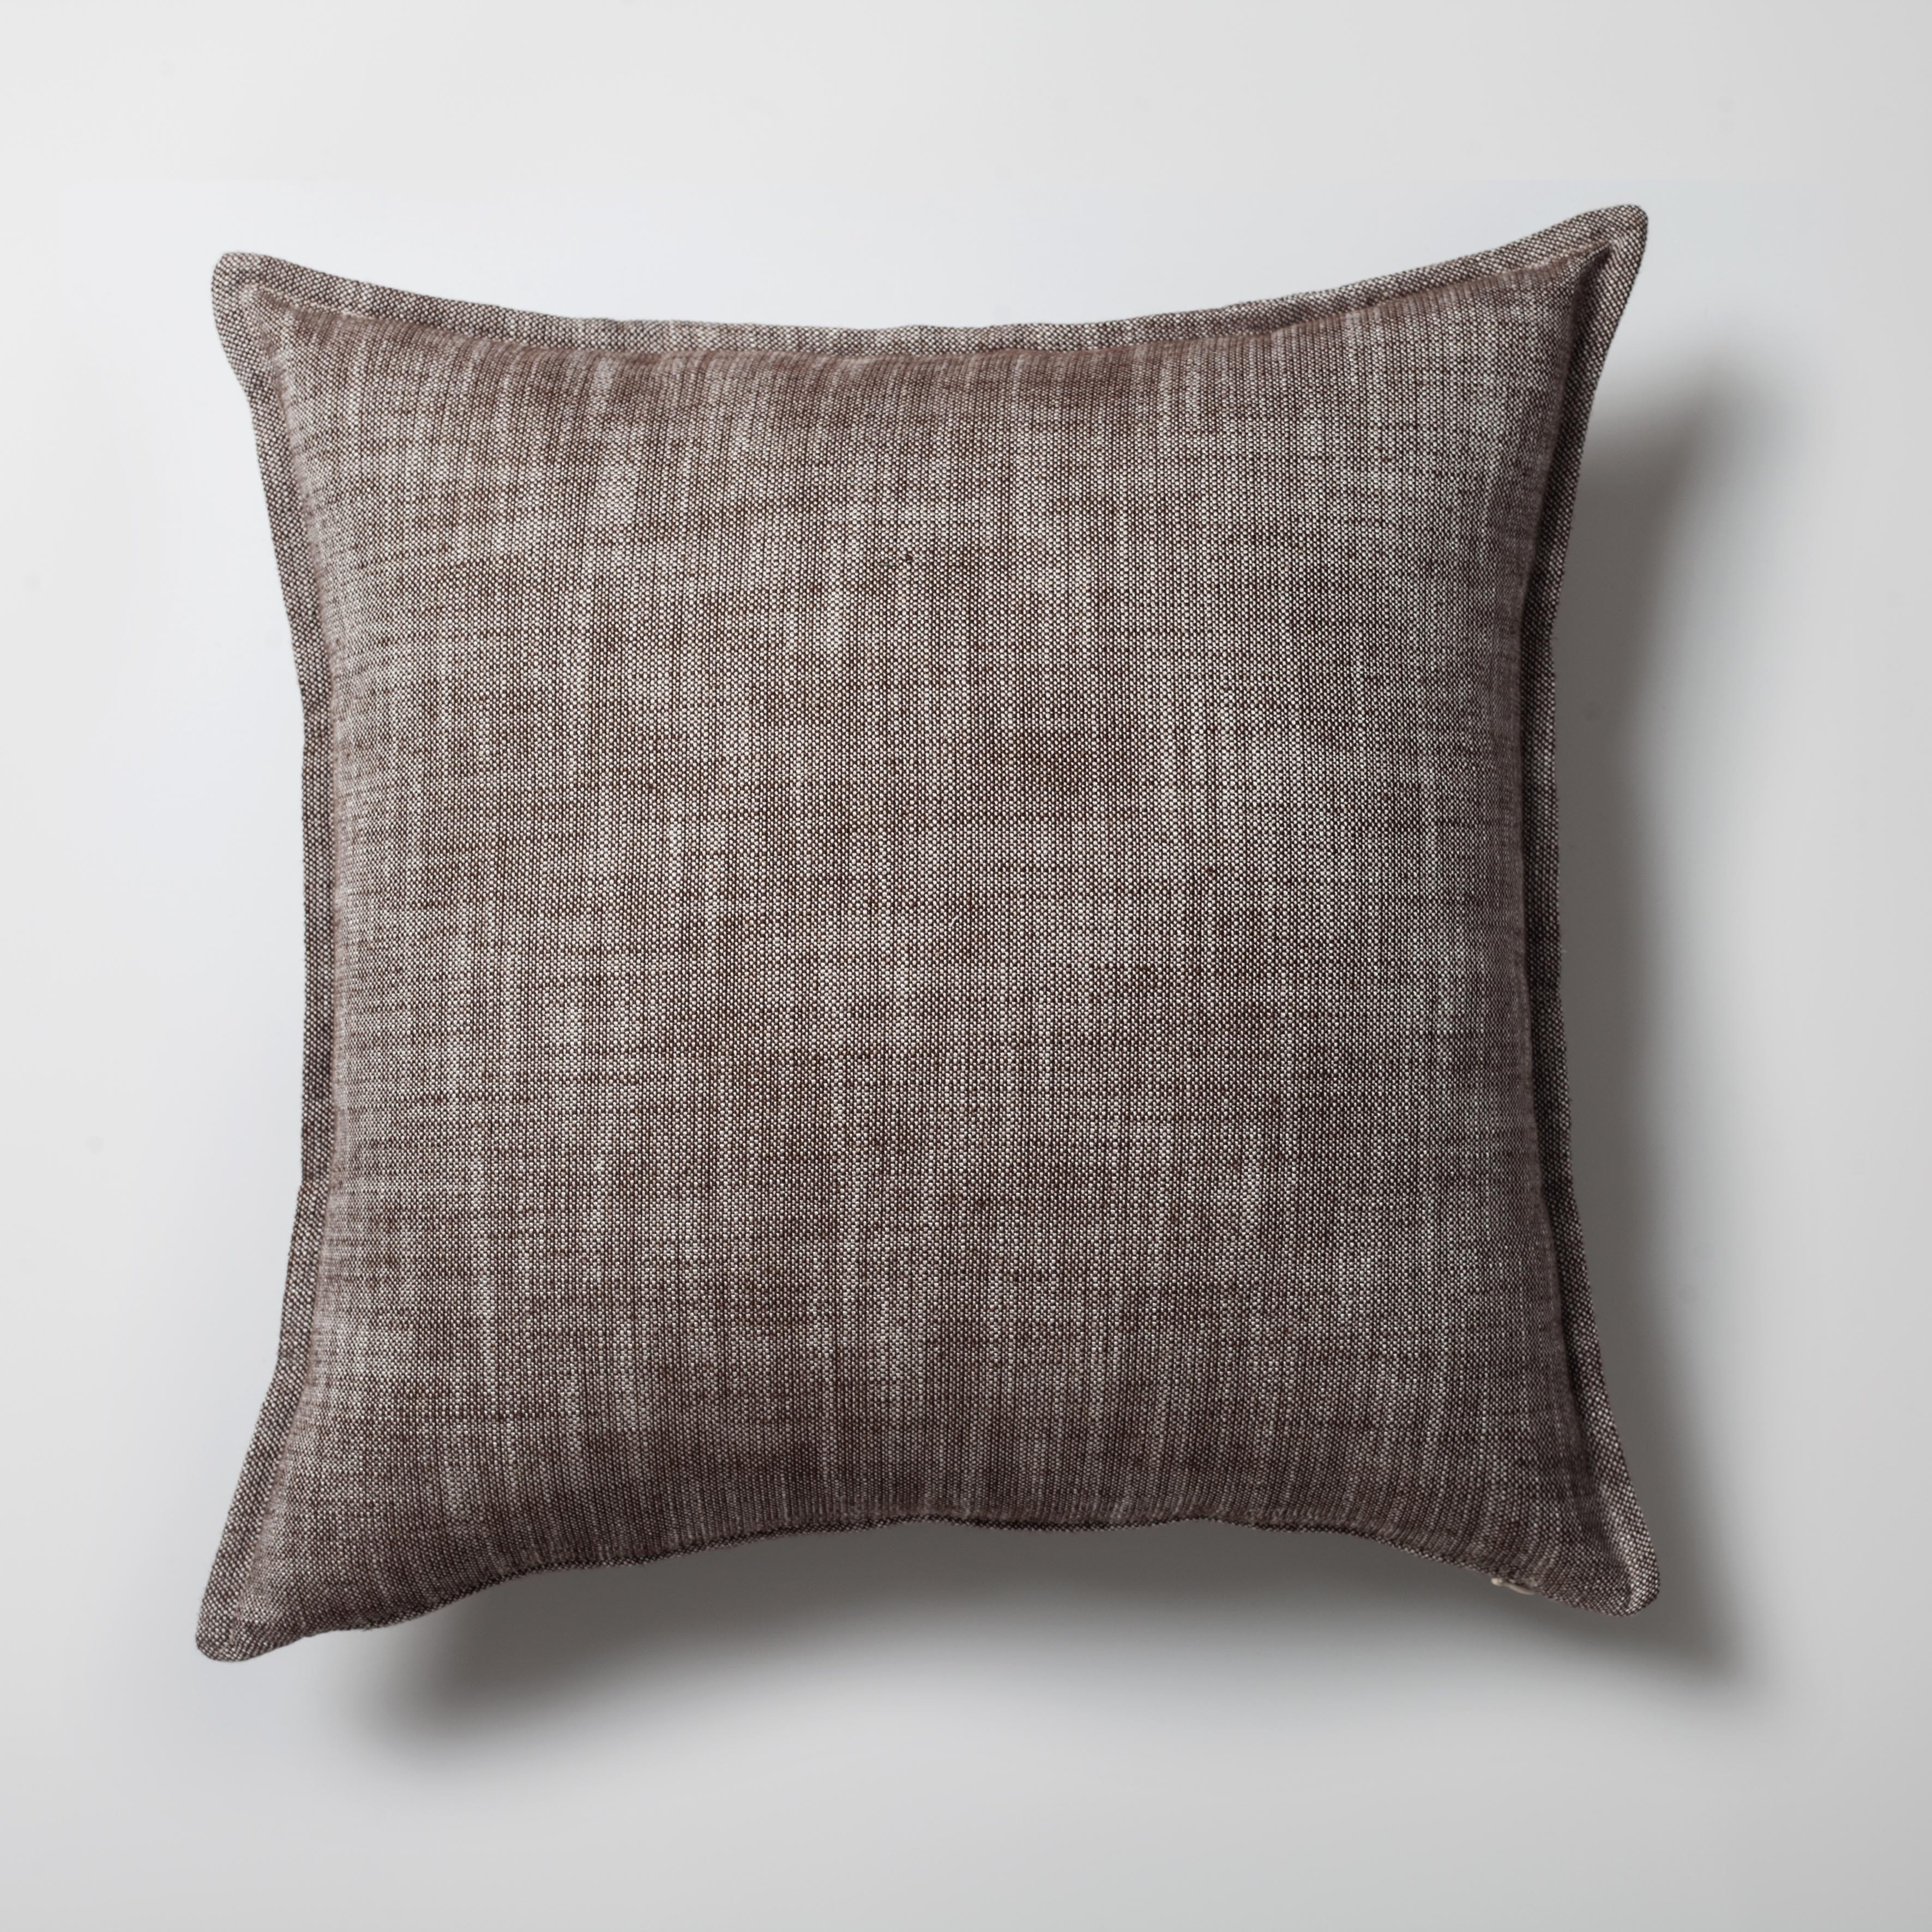 "Porto" - Linen Square Pillow 20x20 Inch - Brown (Cover Only)